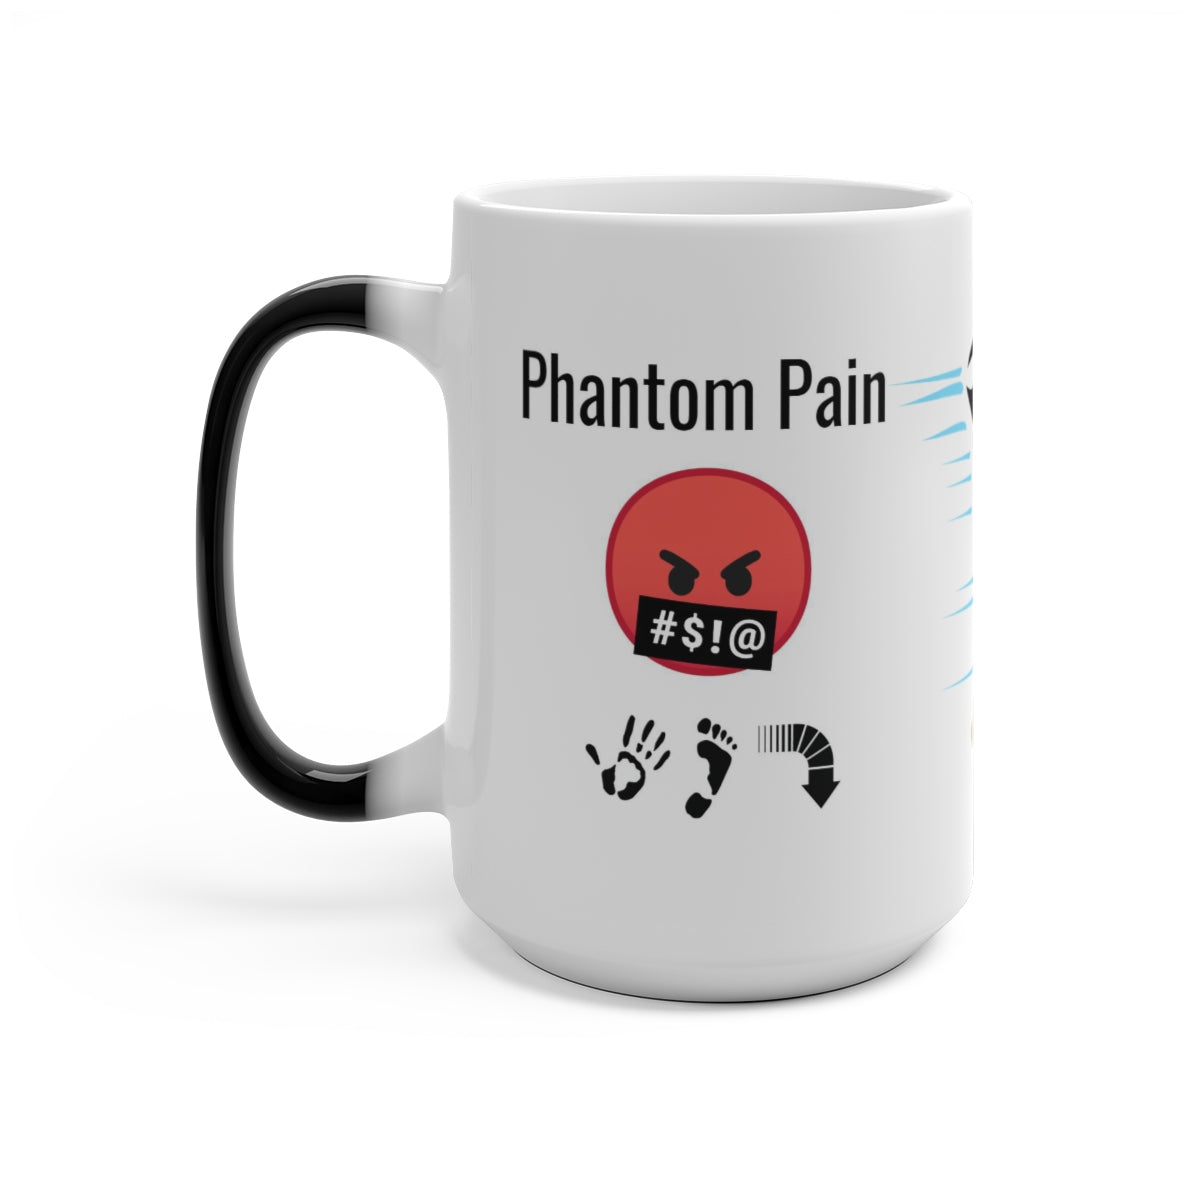 Five Toes Down Pain.2 Color Changing Mug